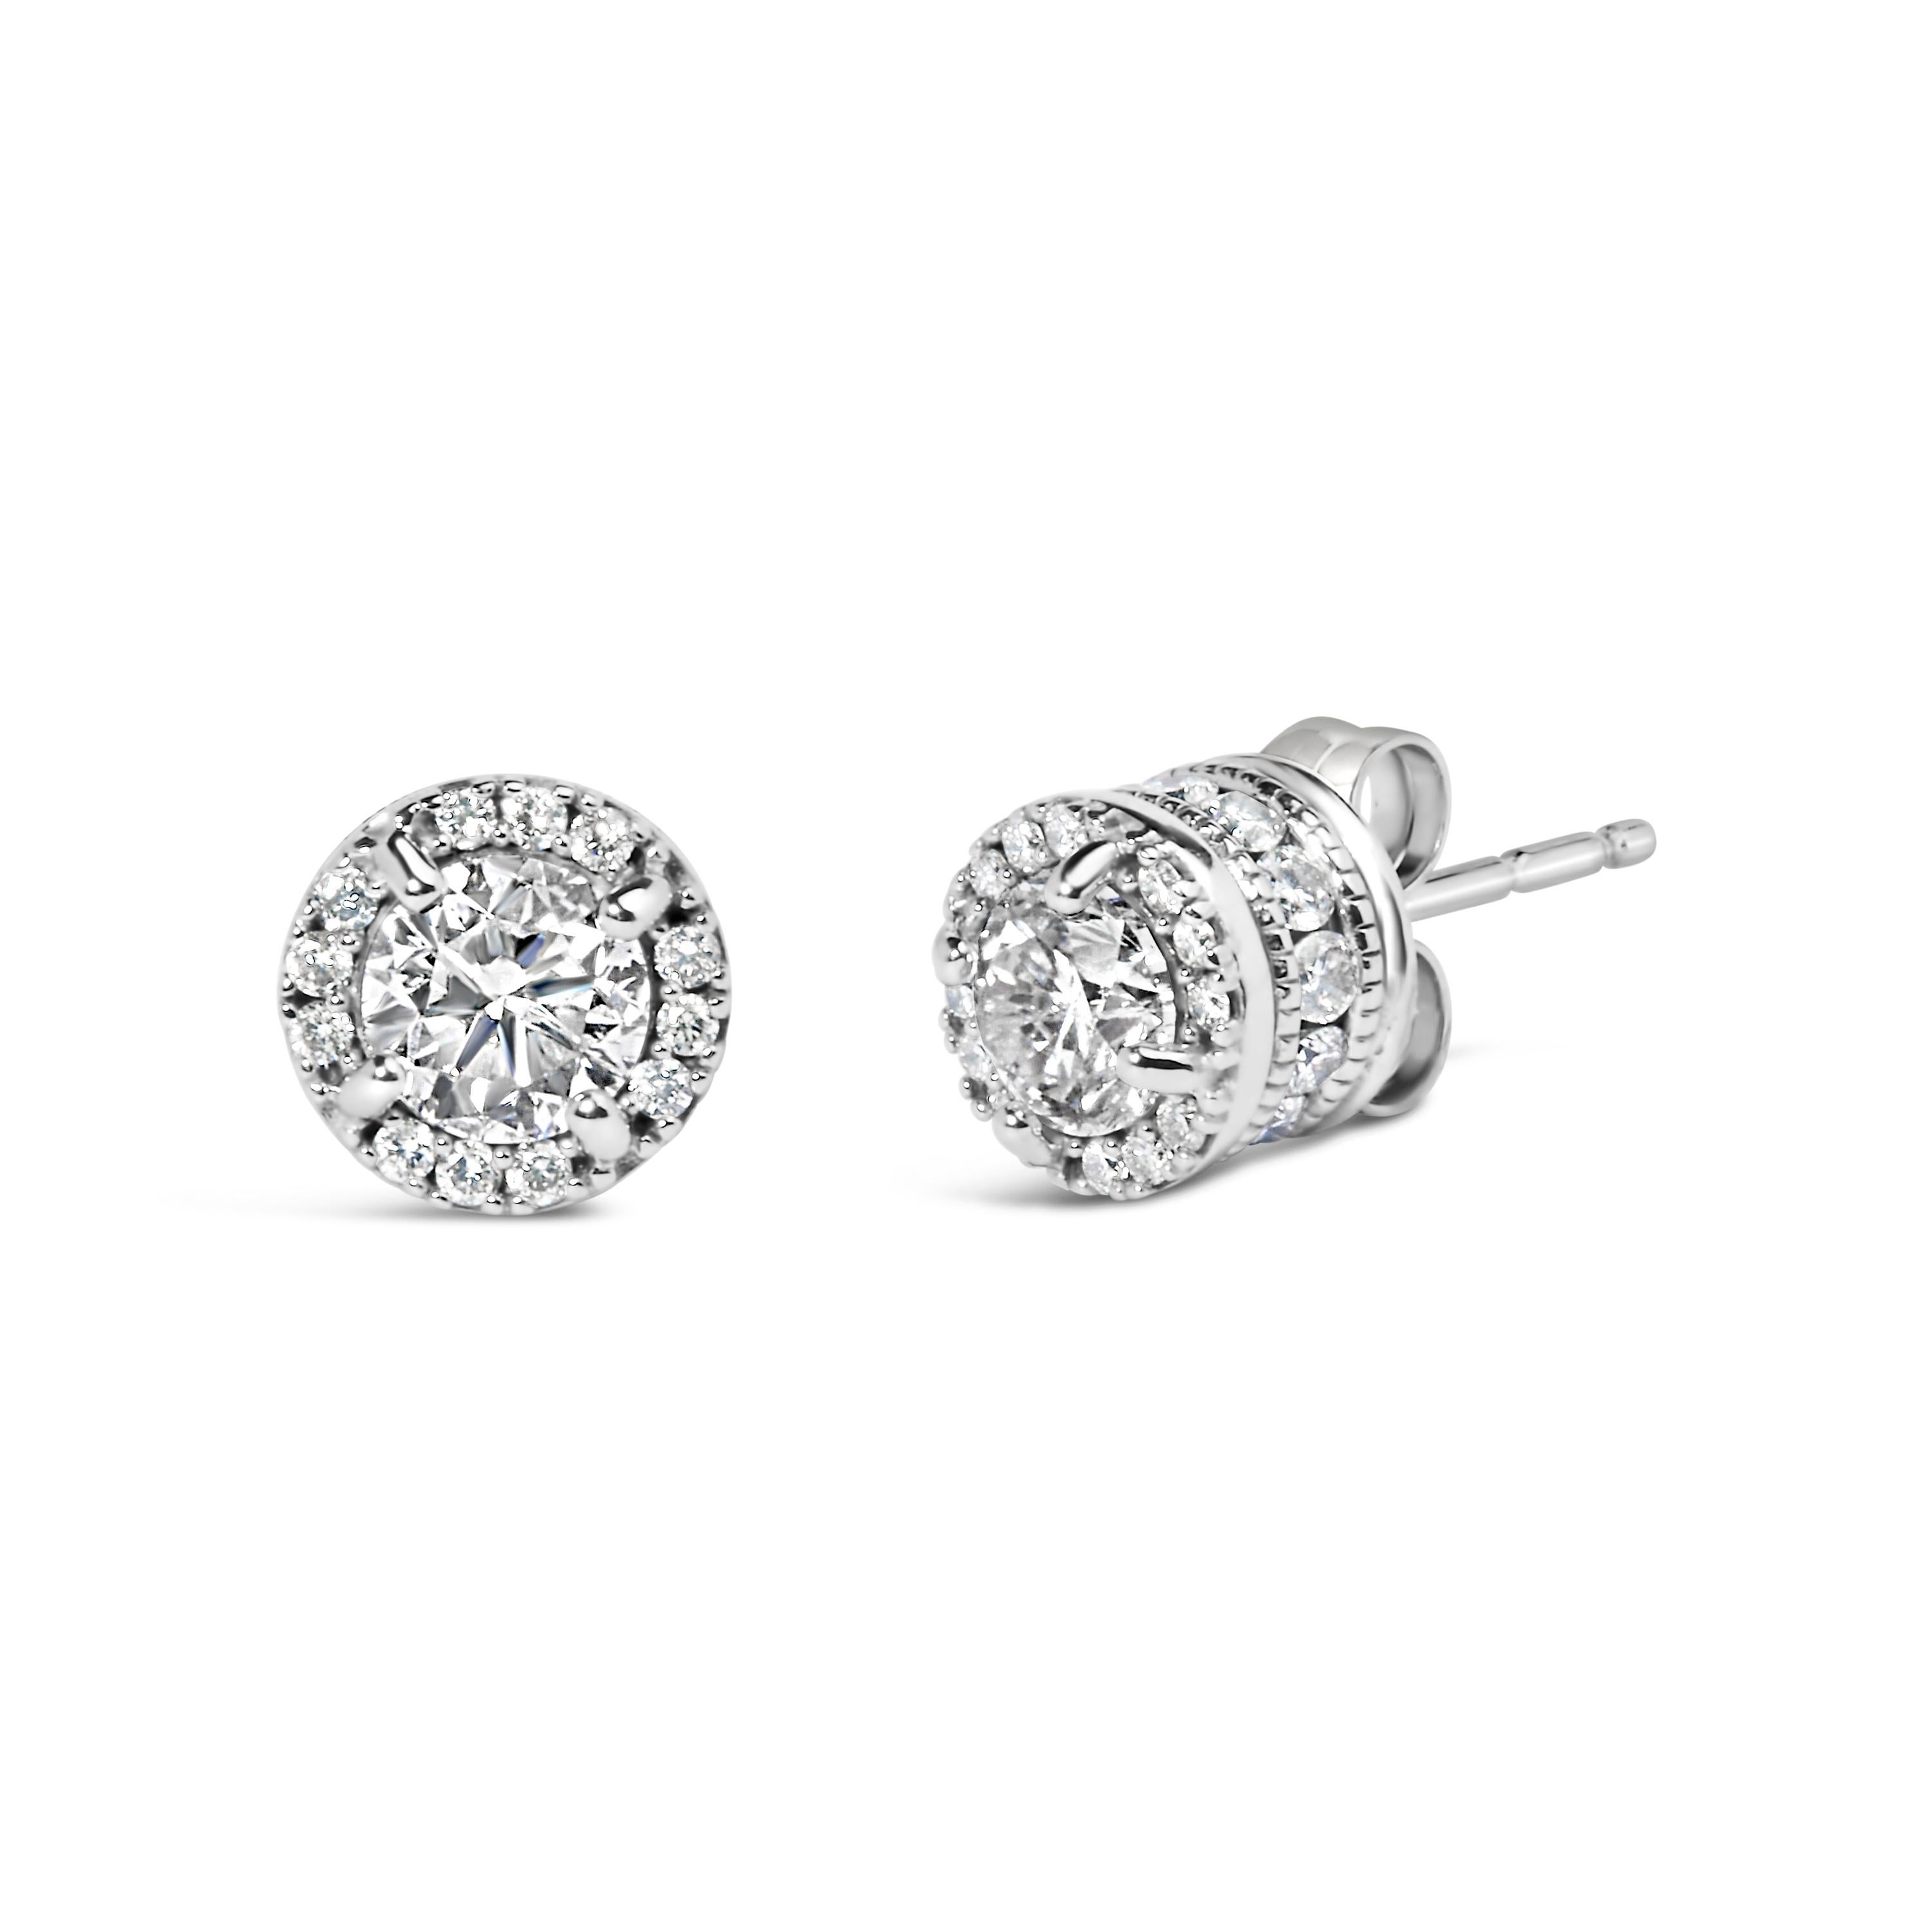 Embrace understated elegance with our Diamond Hidden Halo Stud Earrings, crafted from gleaming 10K white gold. Adorned with 50 natural round diamonds totaling 1.0 cttw, each stone set in a secure 4-prong setting. The H-I color diamonds dazzle with